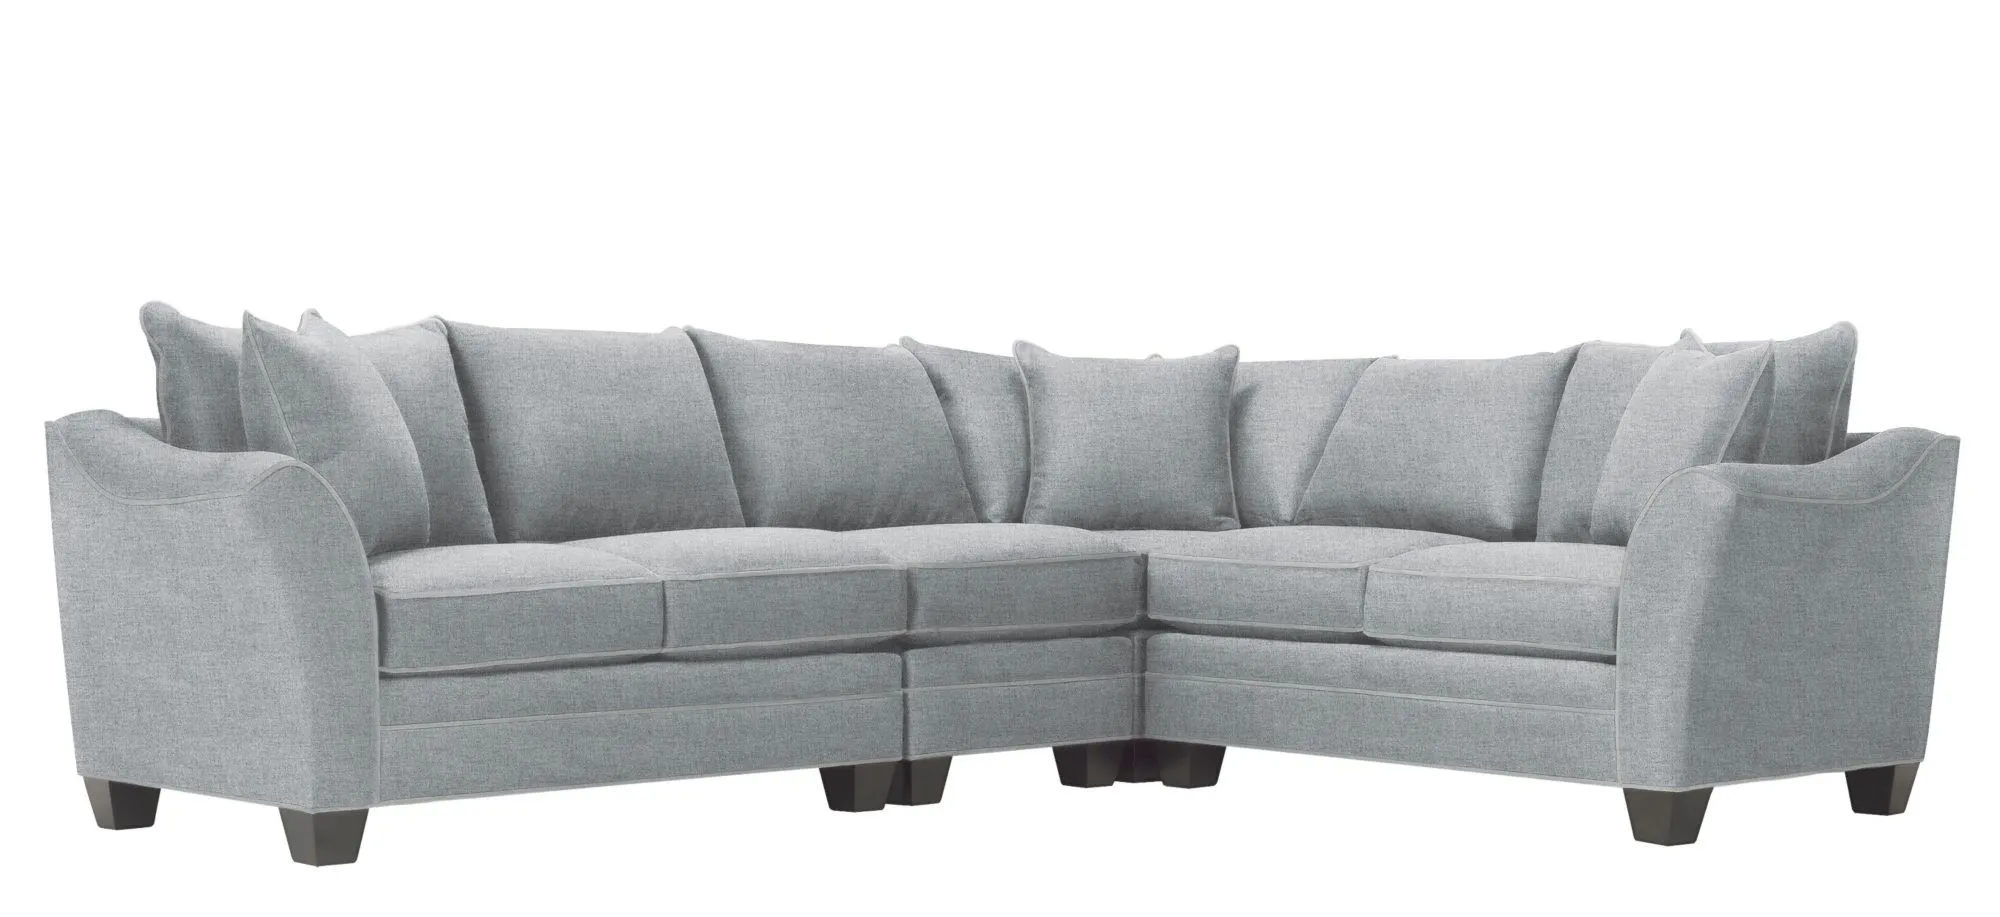 Foresthill 4-pc. Loveseat Sectional Sofa in Santa Rosa Ash by H.M. Richards